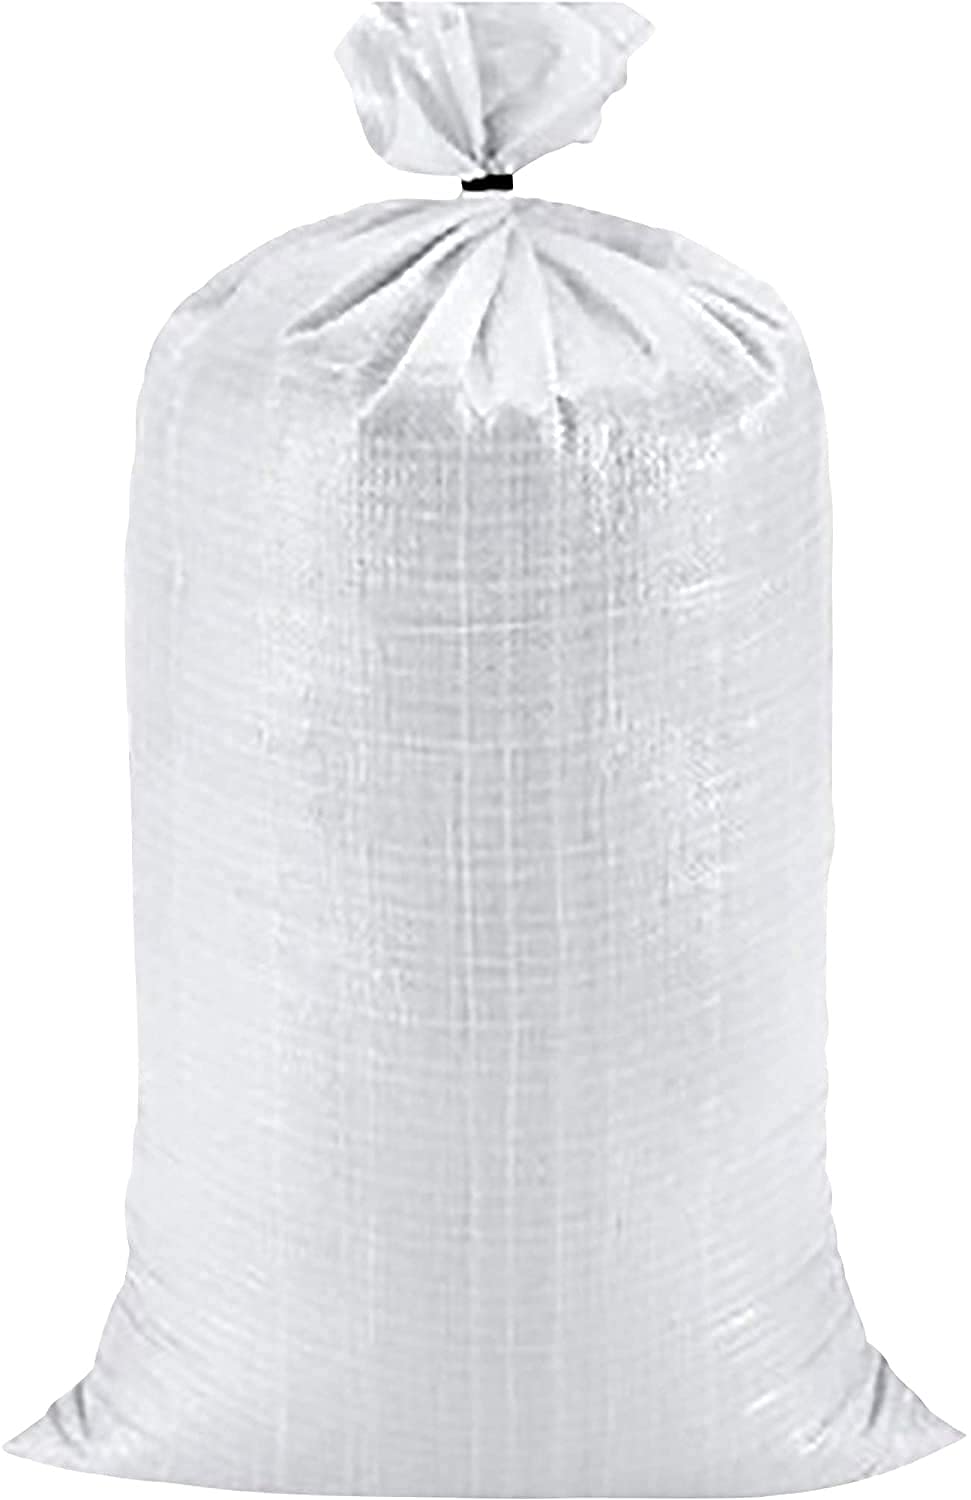 Generic Steel Grit Abrasive Blasting Media, Size 110 Steel Shot. 50lbs Bags You get 50 pounds of Material